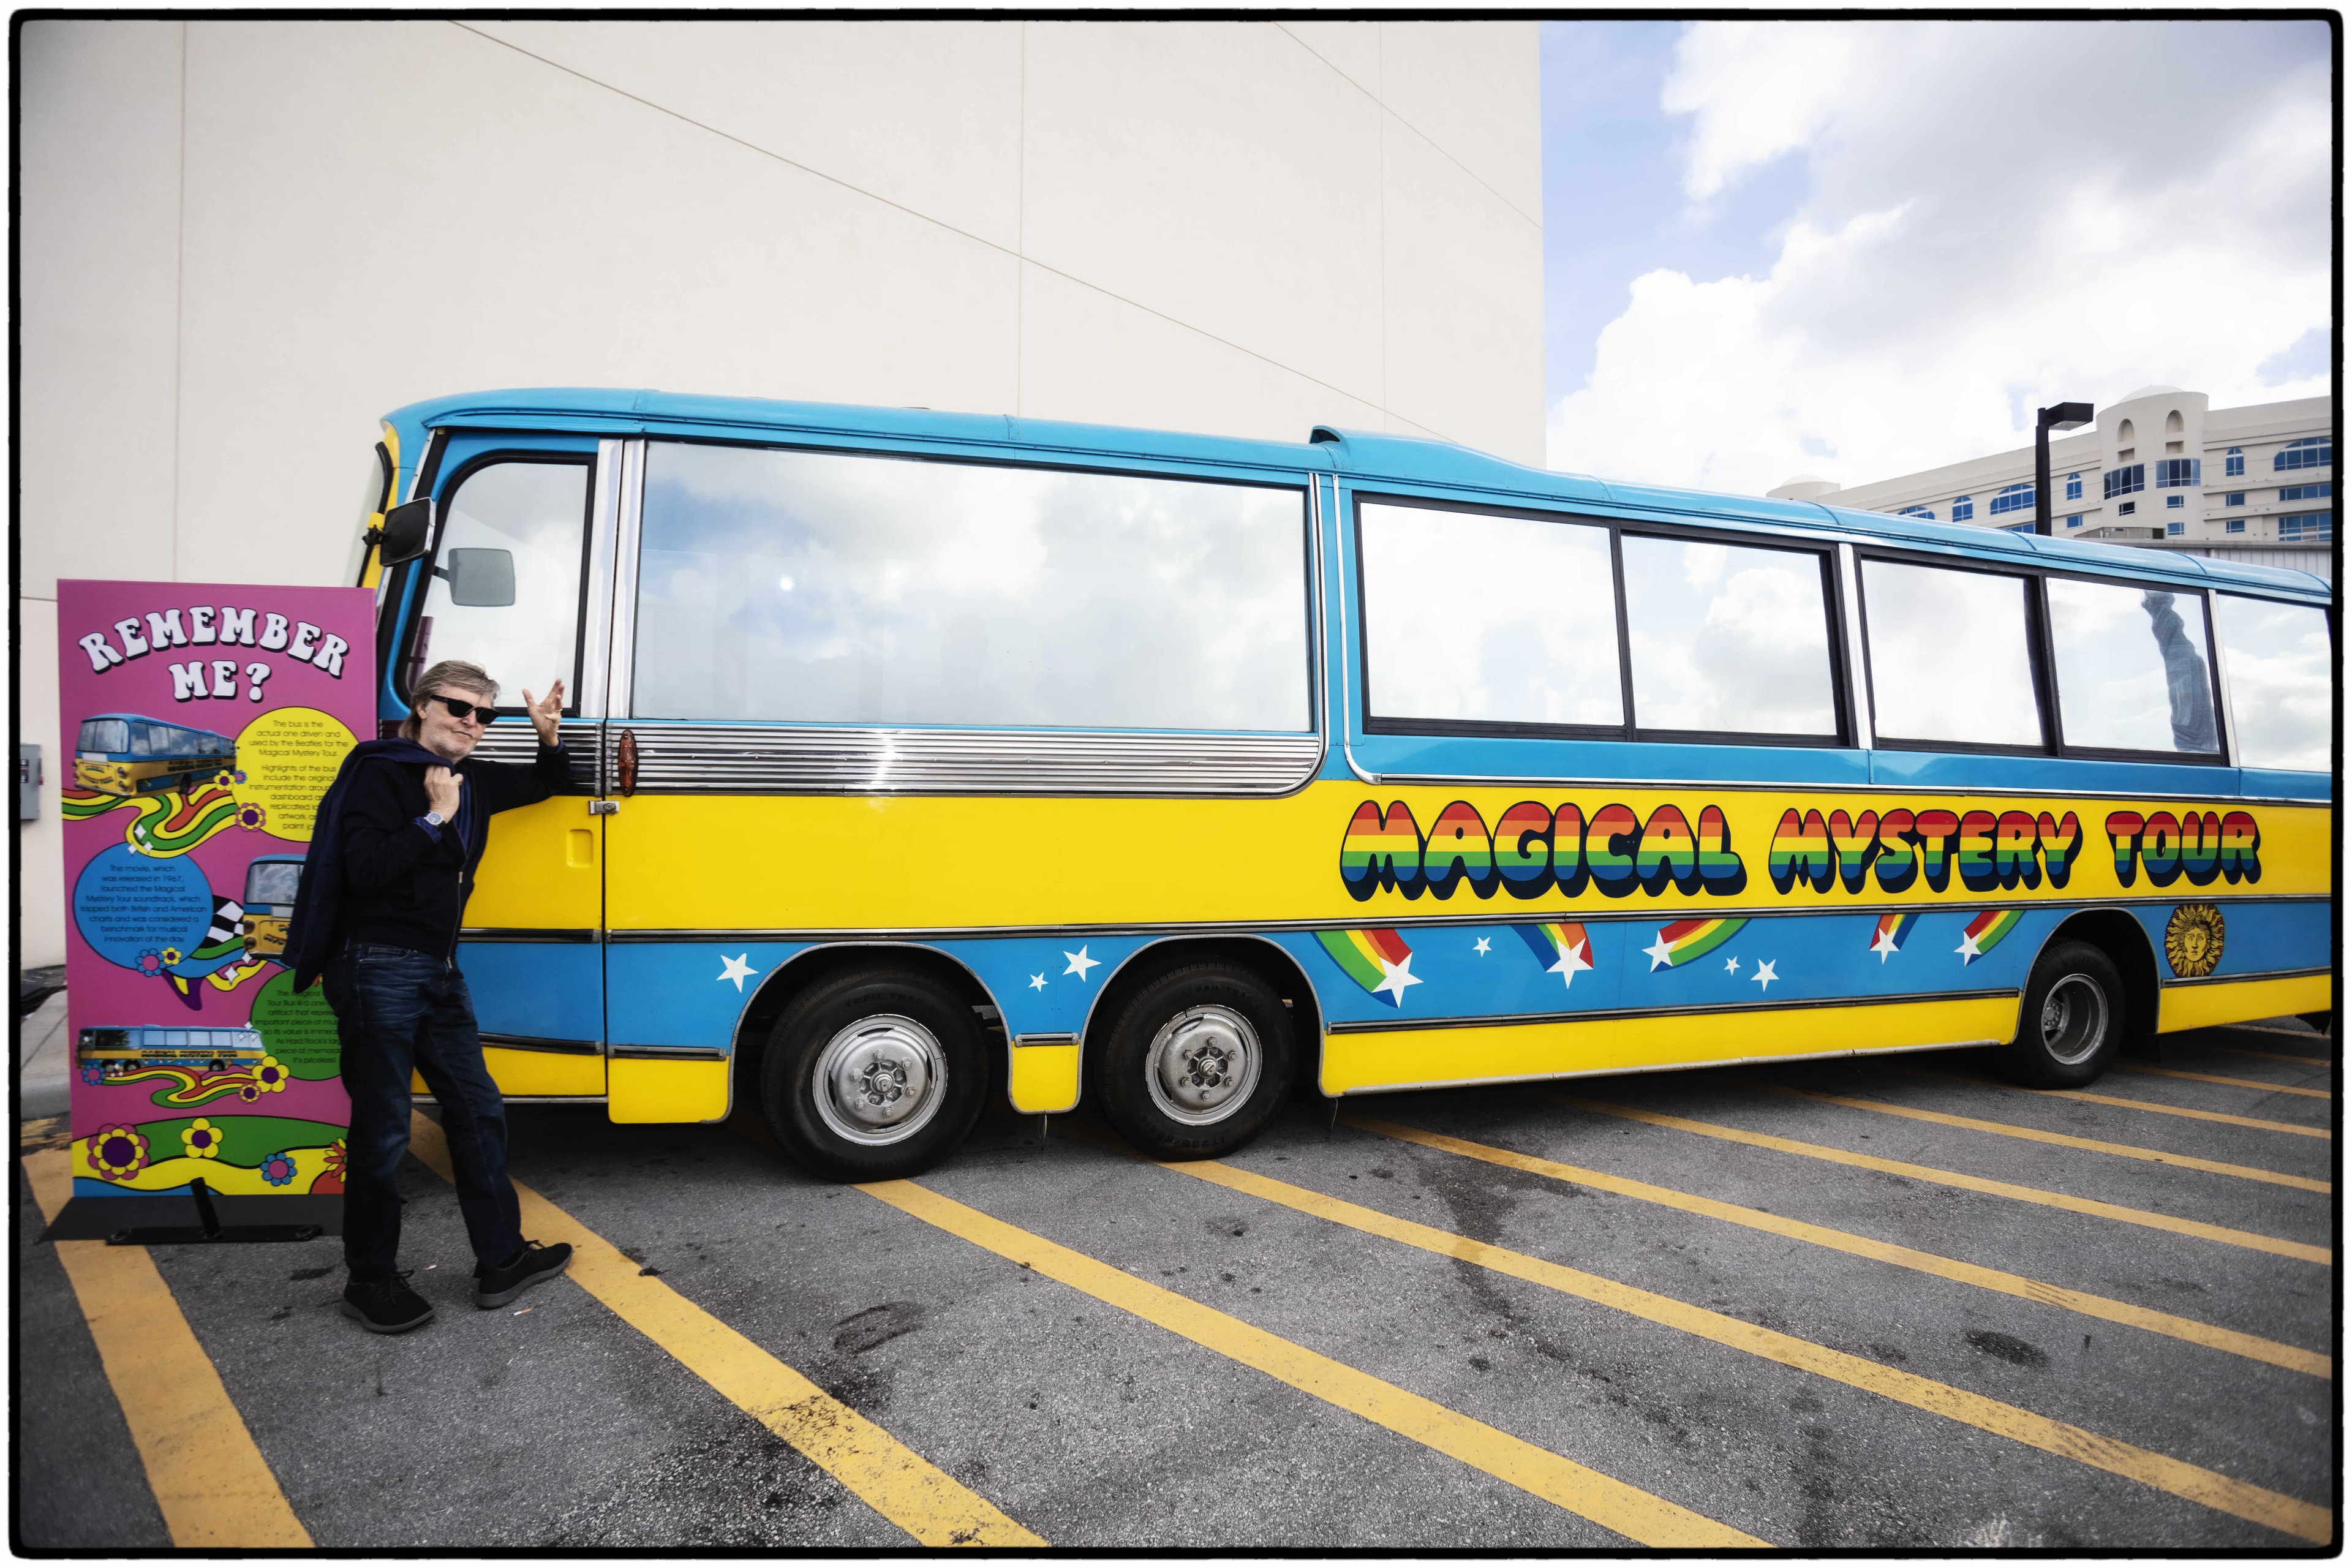 Paul stands in front of the Magical Mystery Tour bus